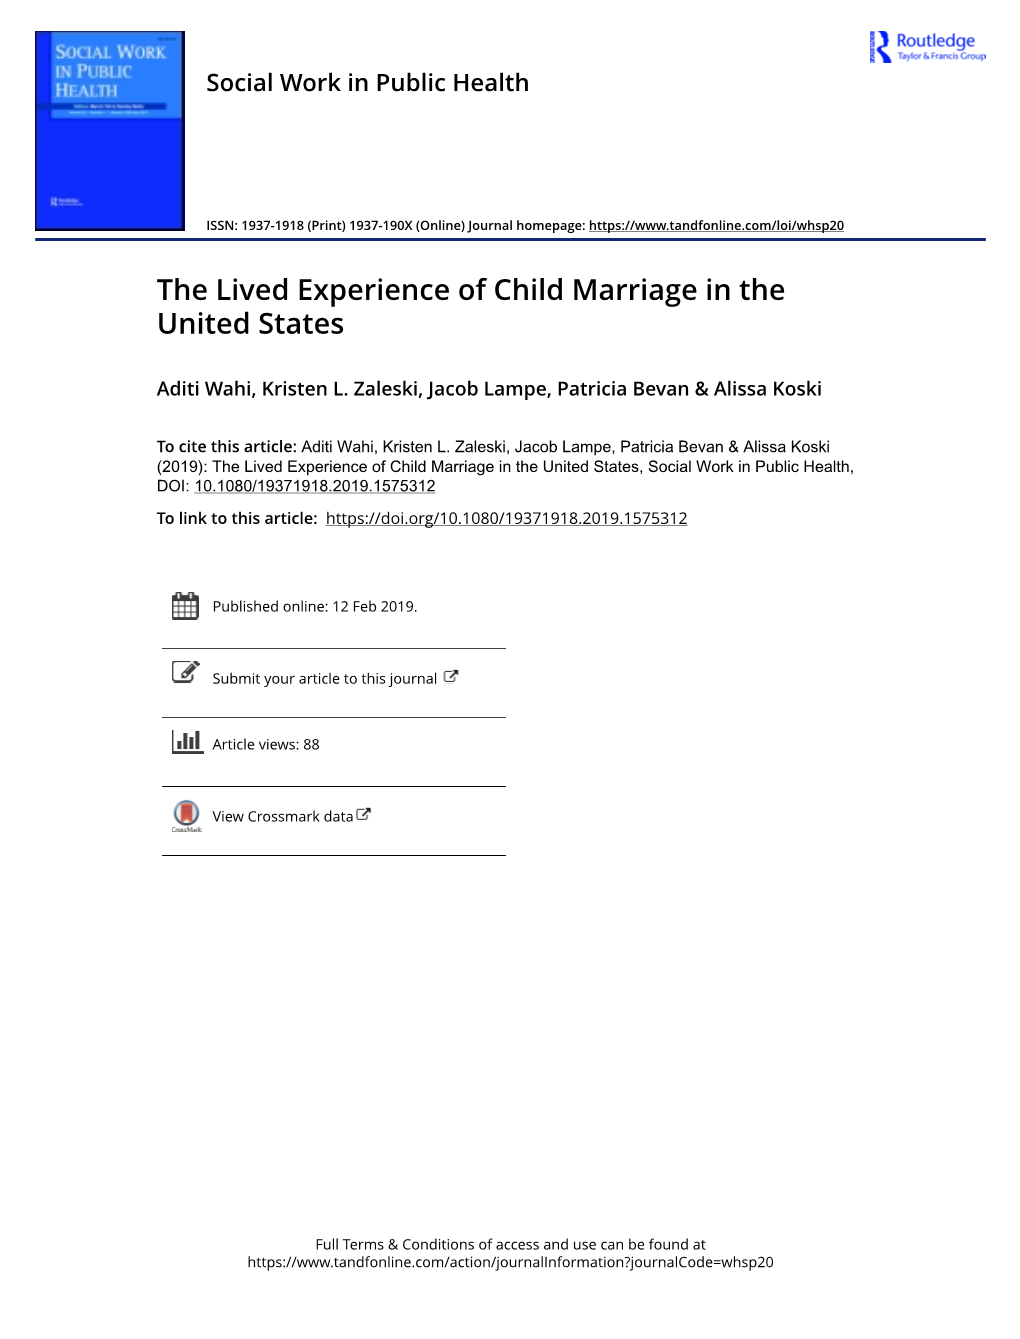 The Lived Experience of Child Marriage in the United States